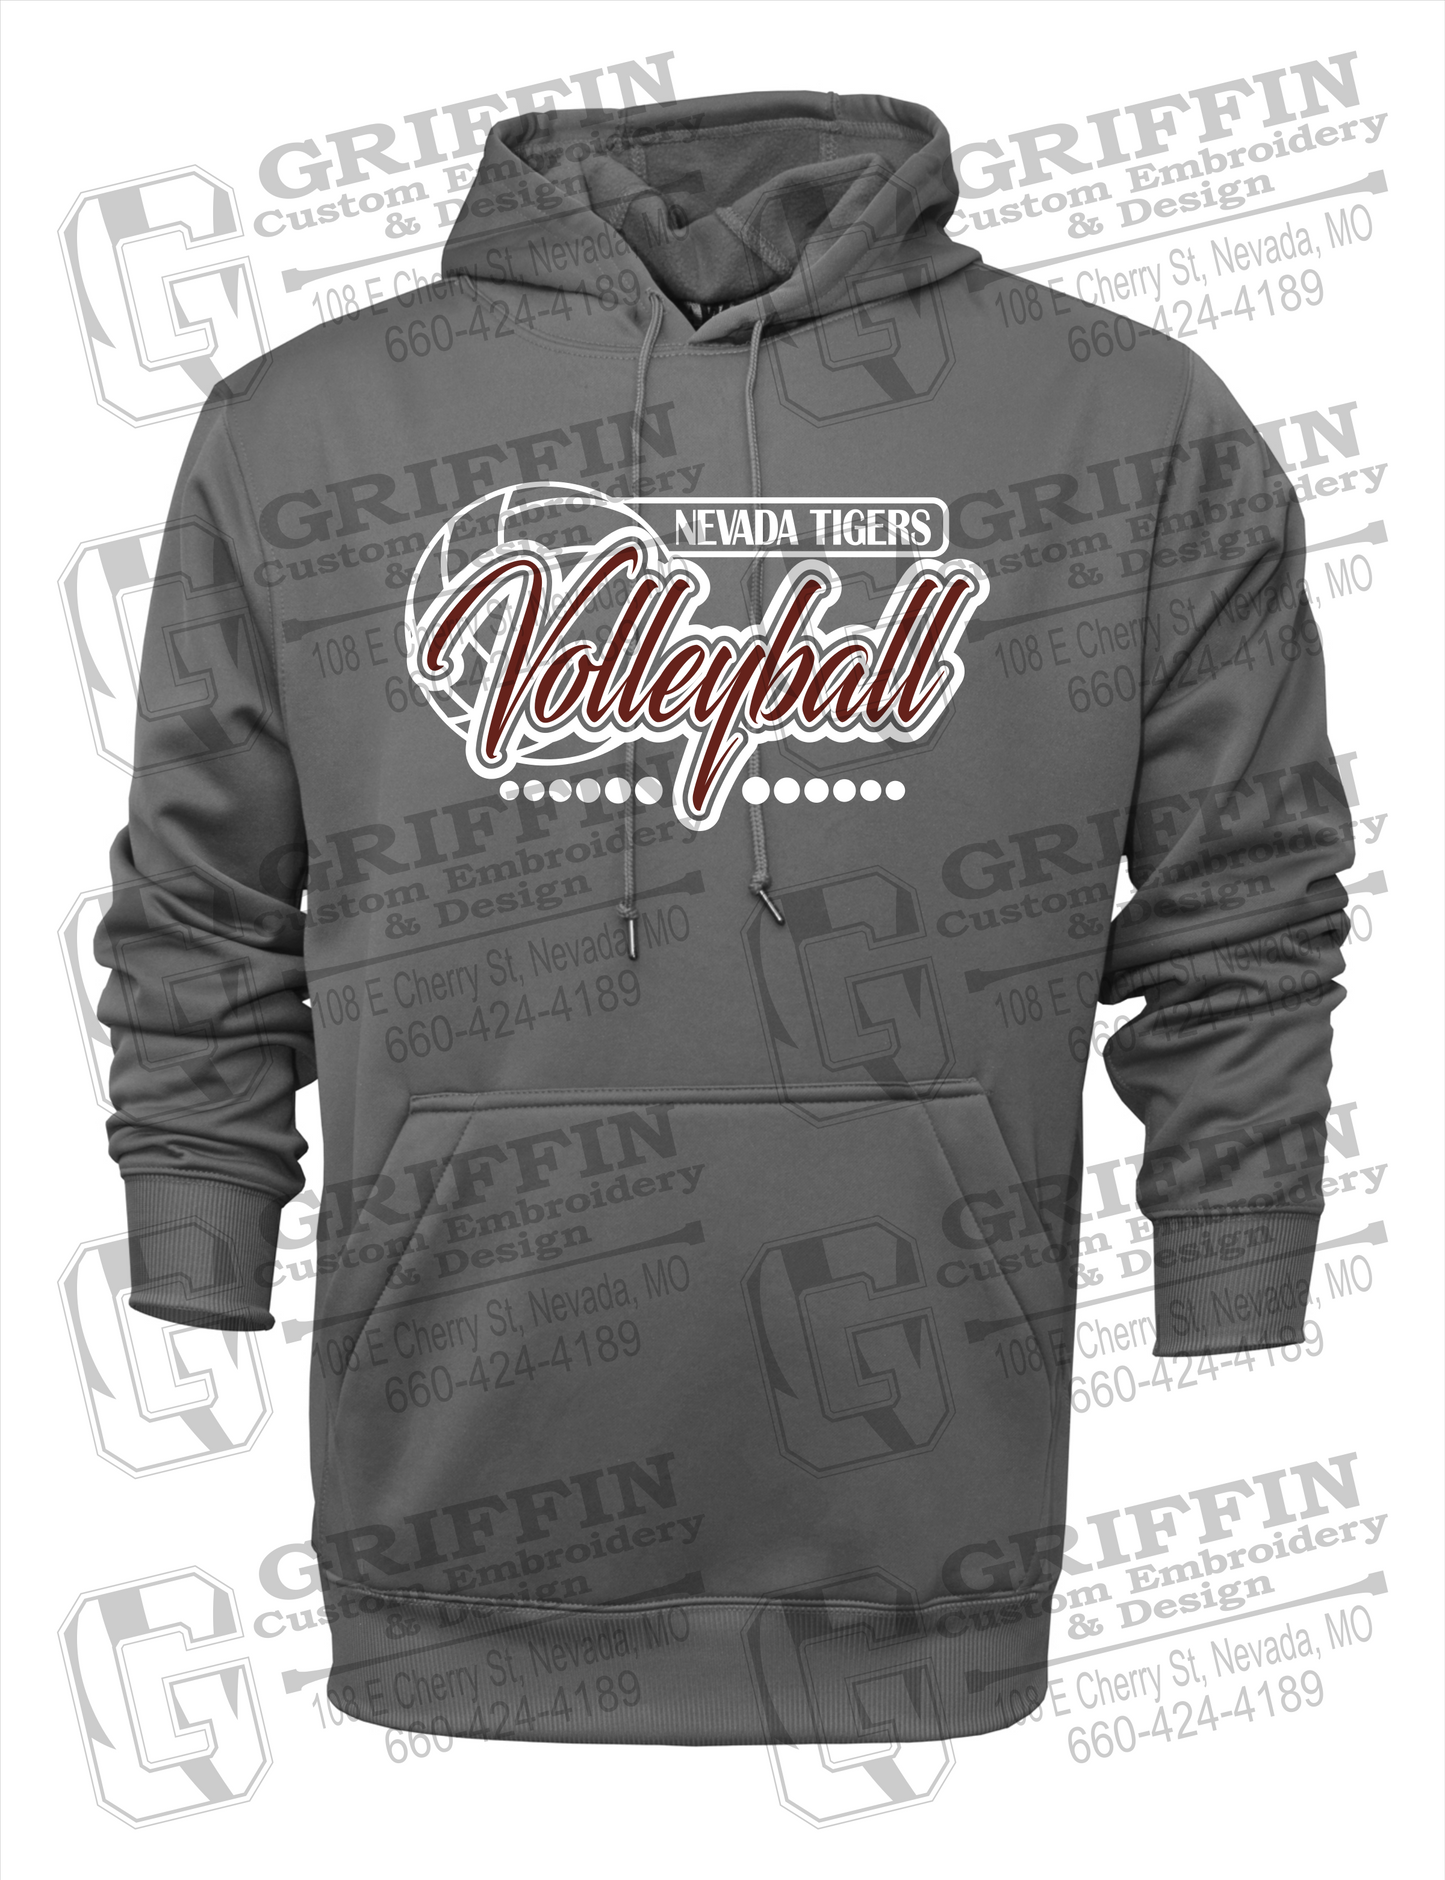 Nevada Tigers 23-Q Hoodie - Volleyball